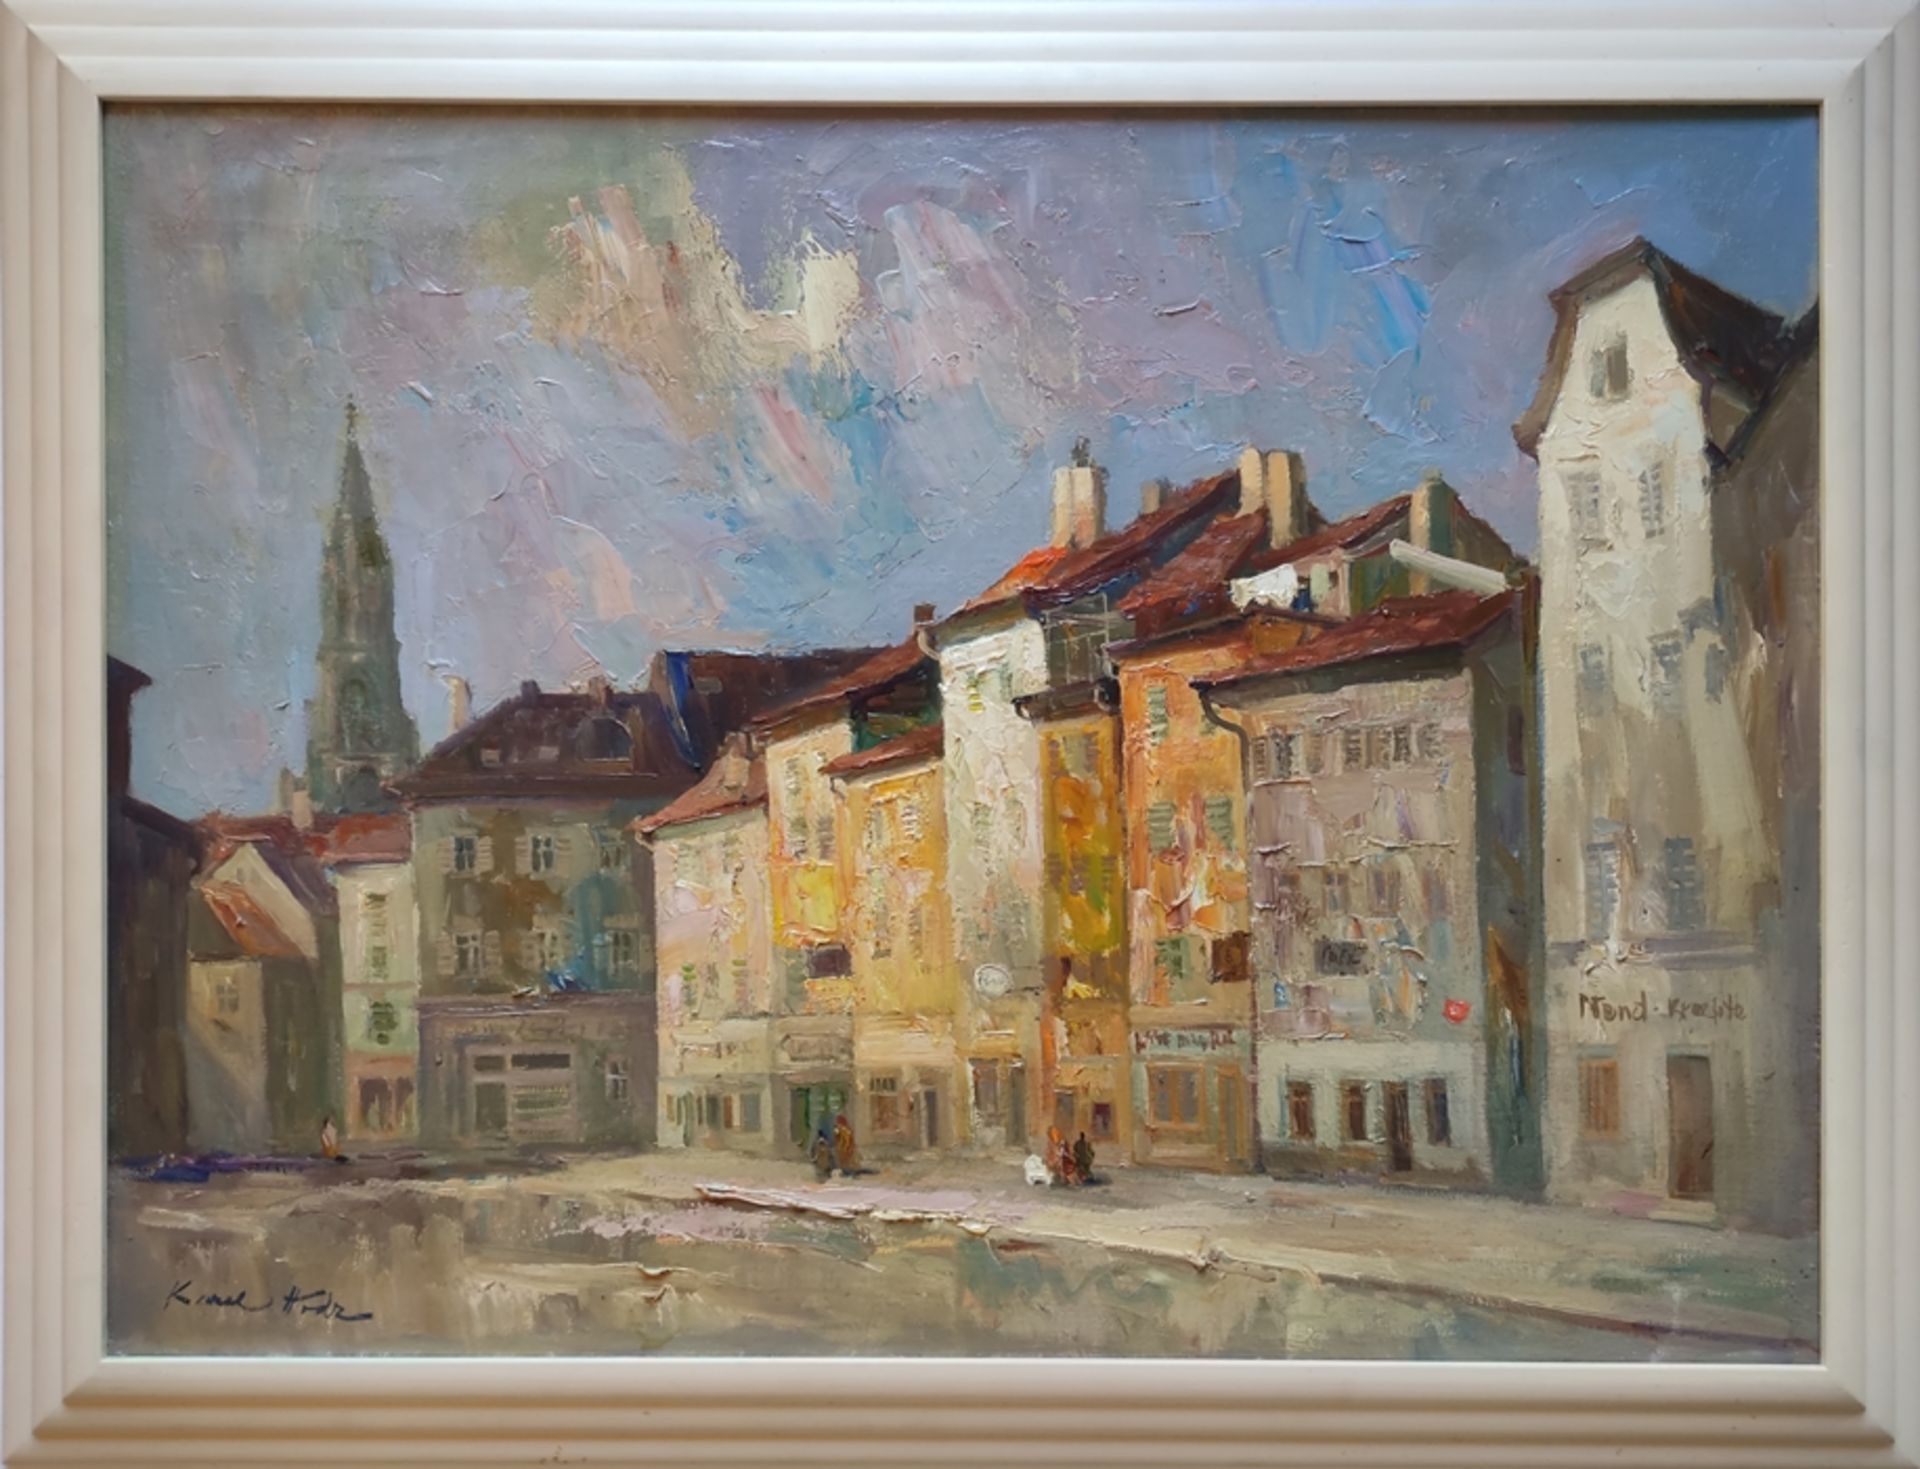 Hodr, Karel (1910 Prague - 2002 Constance) "Constance", city view of the narrow alleys of Constanc - Image 2 of 4